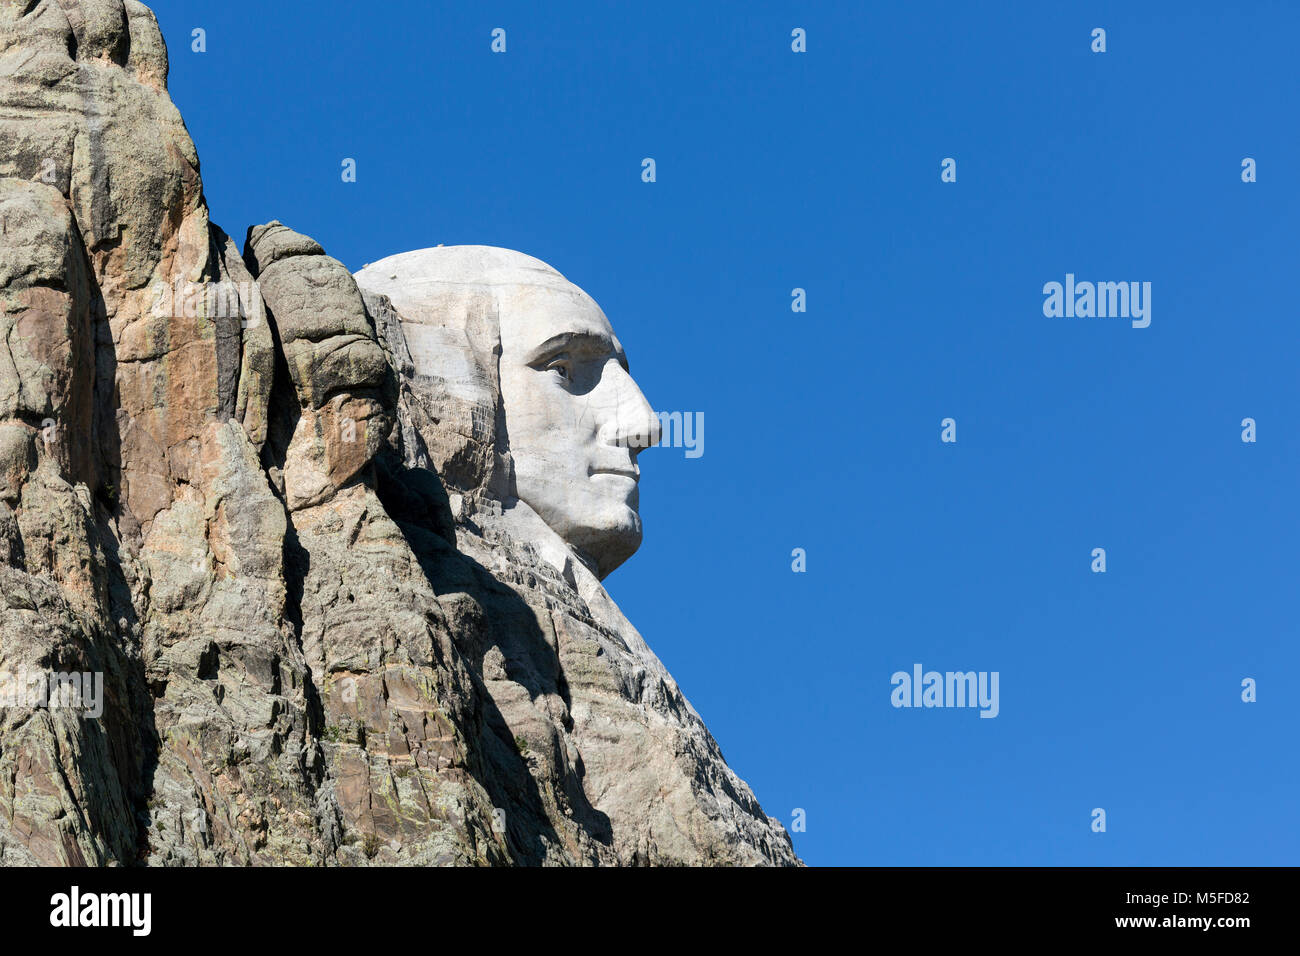 SD00014-00...SOUTH DAKOTA - Presedent George Washington carved into a mountain side at Mount Rushmore National Memorial. Stock Photo